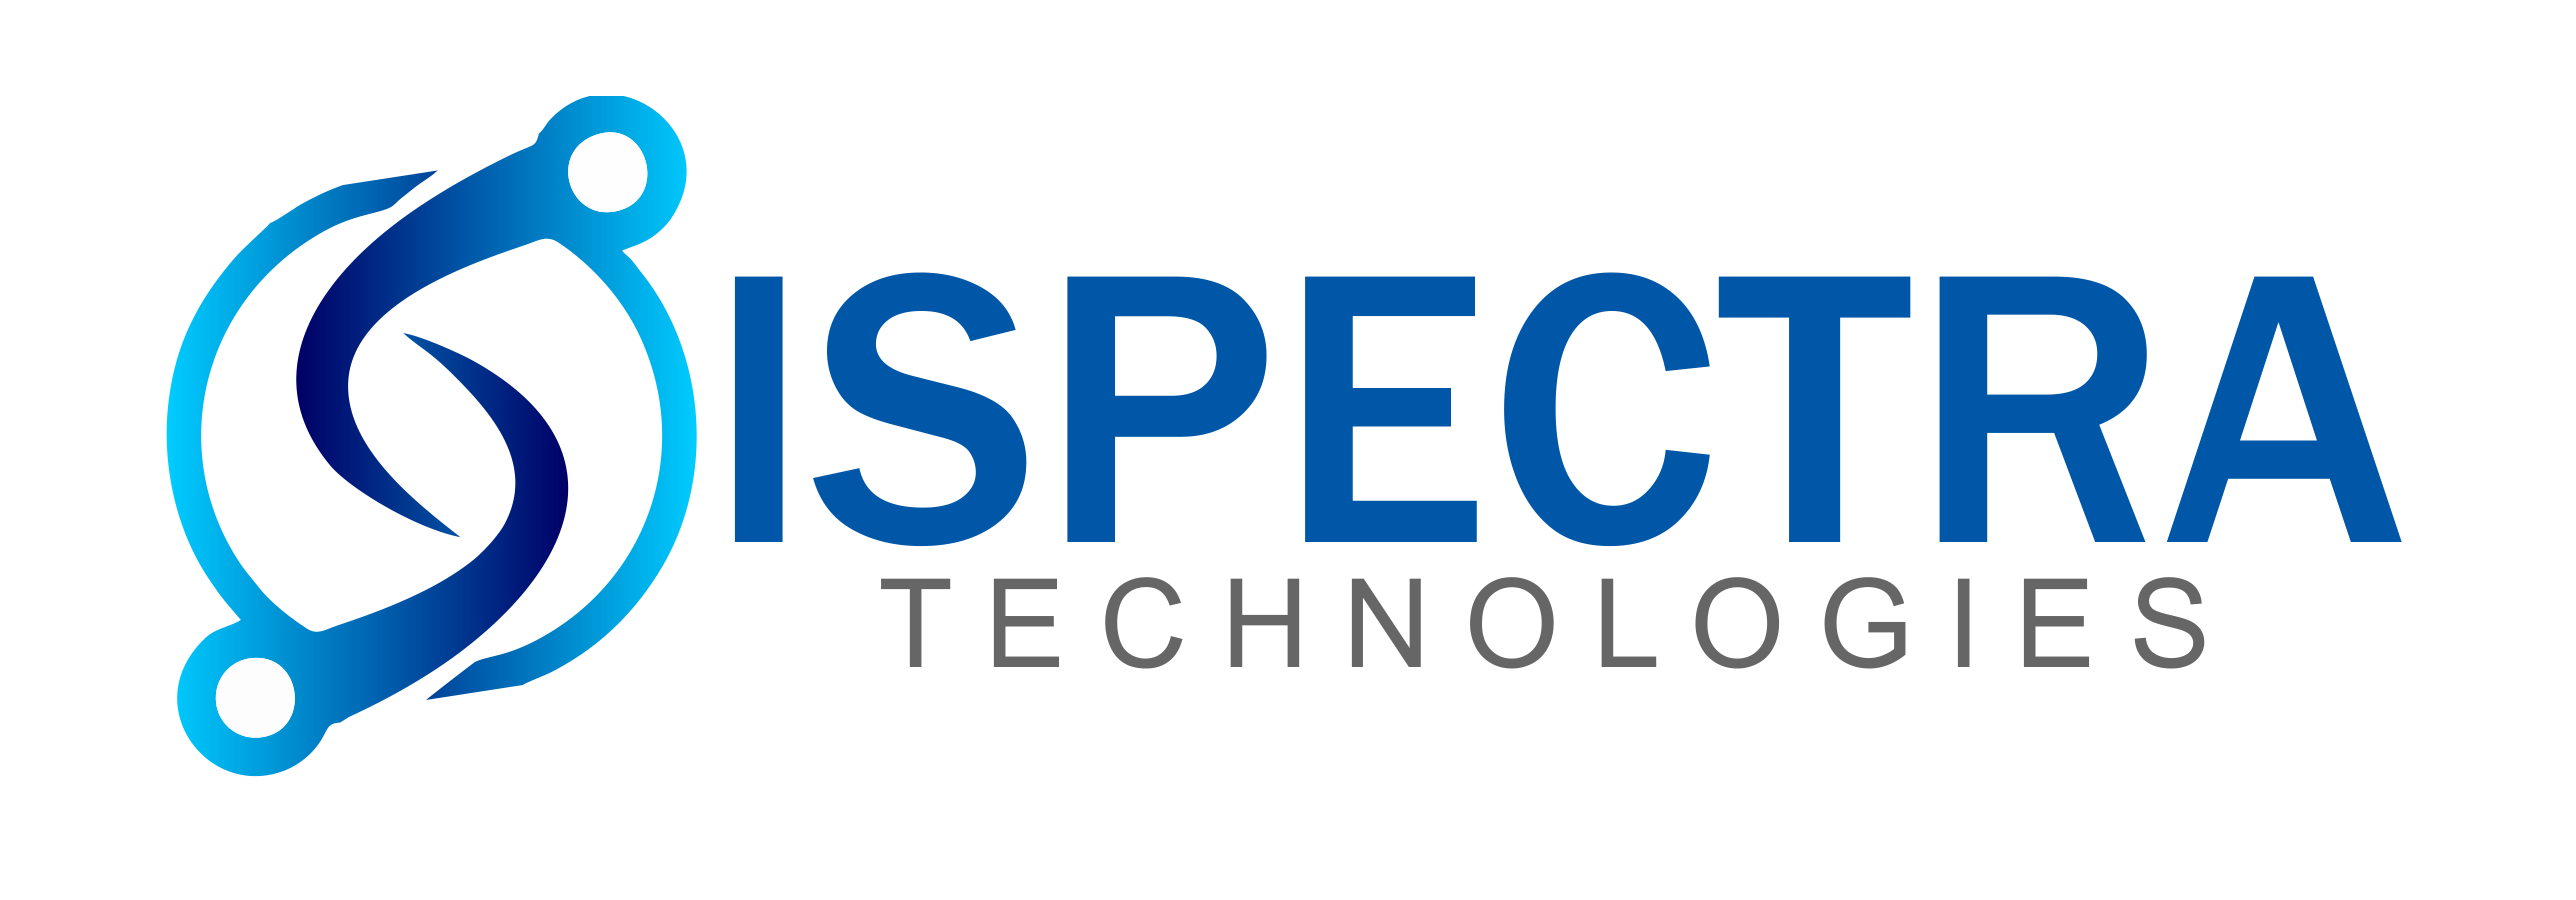 Strategic Insights on IT & Cyber Risk Assessments - ispectra